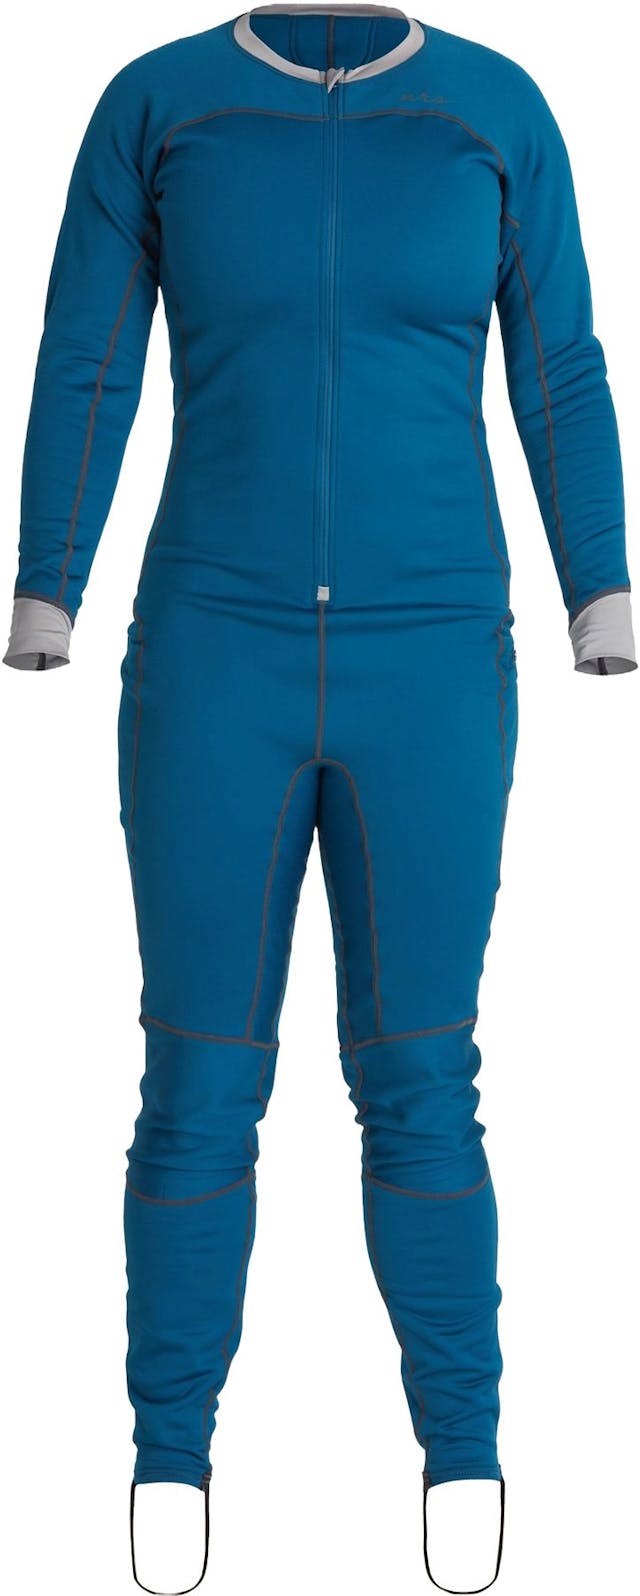 Product image for Expedition Weight Union Suit - Women's